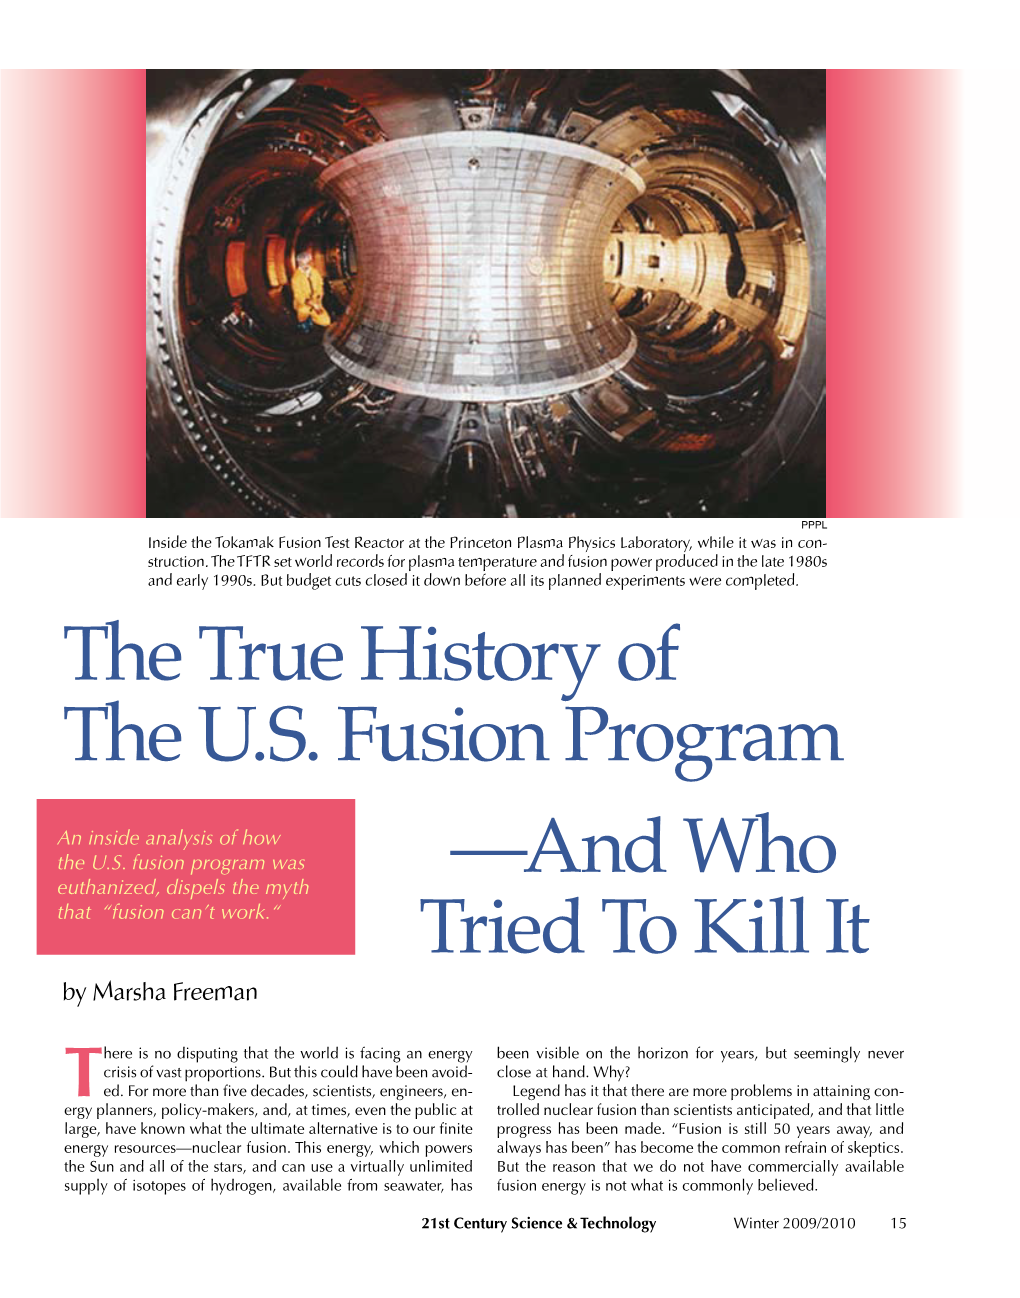 The True History of the U.S. Fusion Program —And Who Tried to Kill It